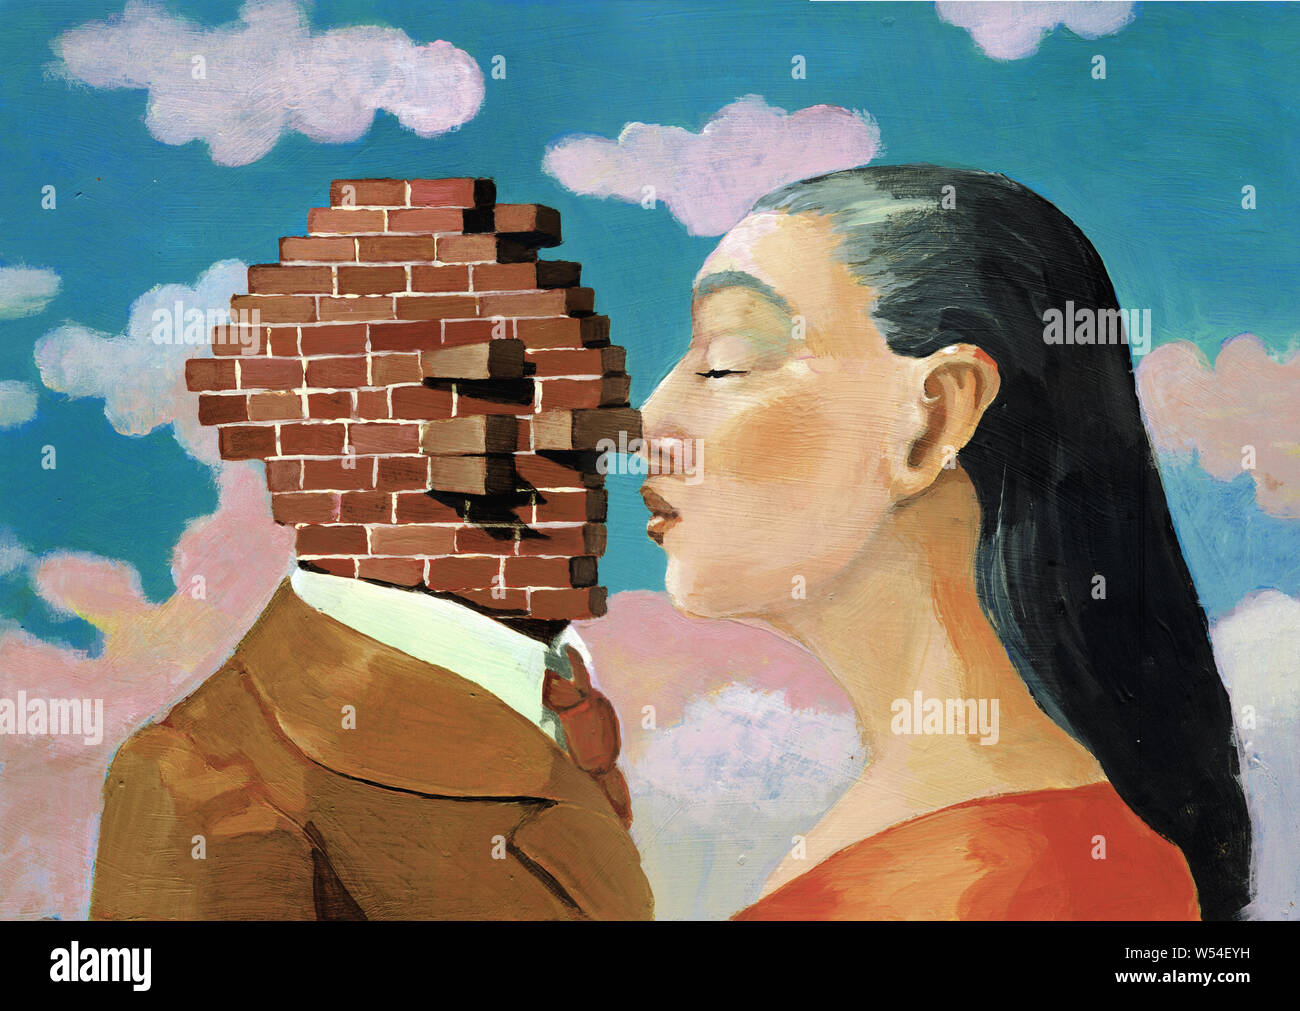 a woman kisses a man with allegory tones of the hardness of feelings surreal artwork acrylic painting Stock Photo